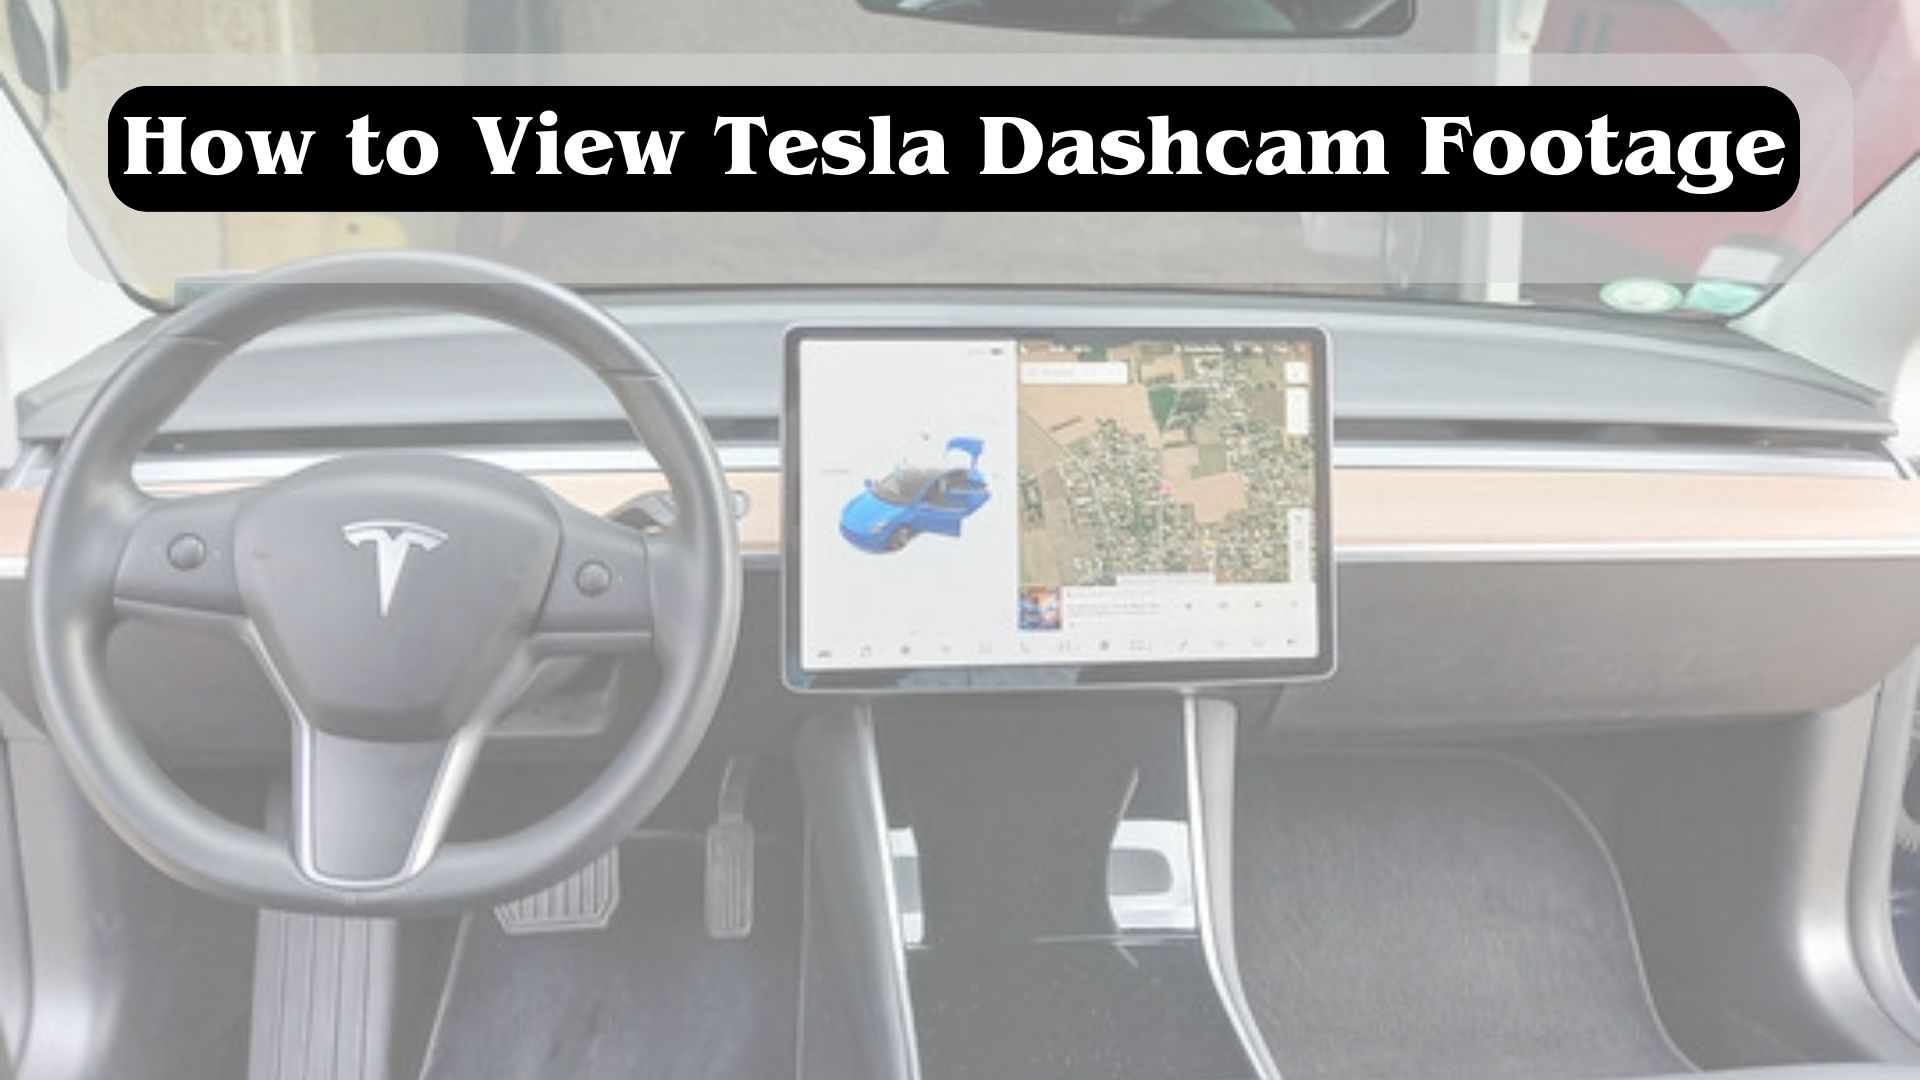 How to View Tesla Dashcam Footage